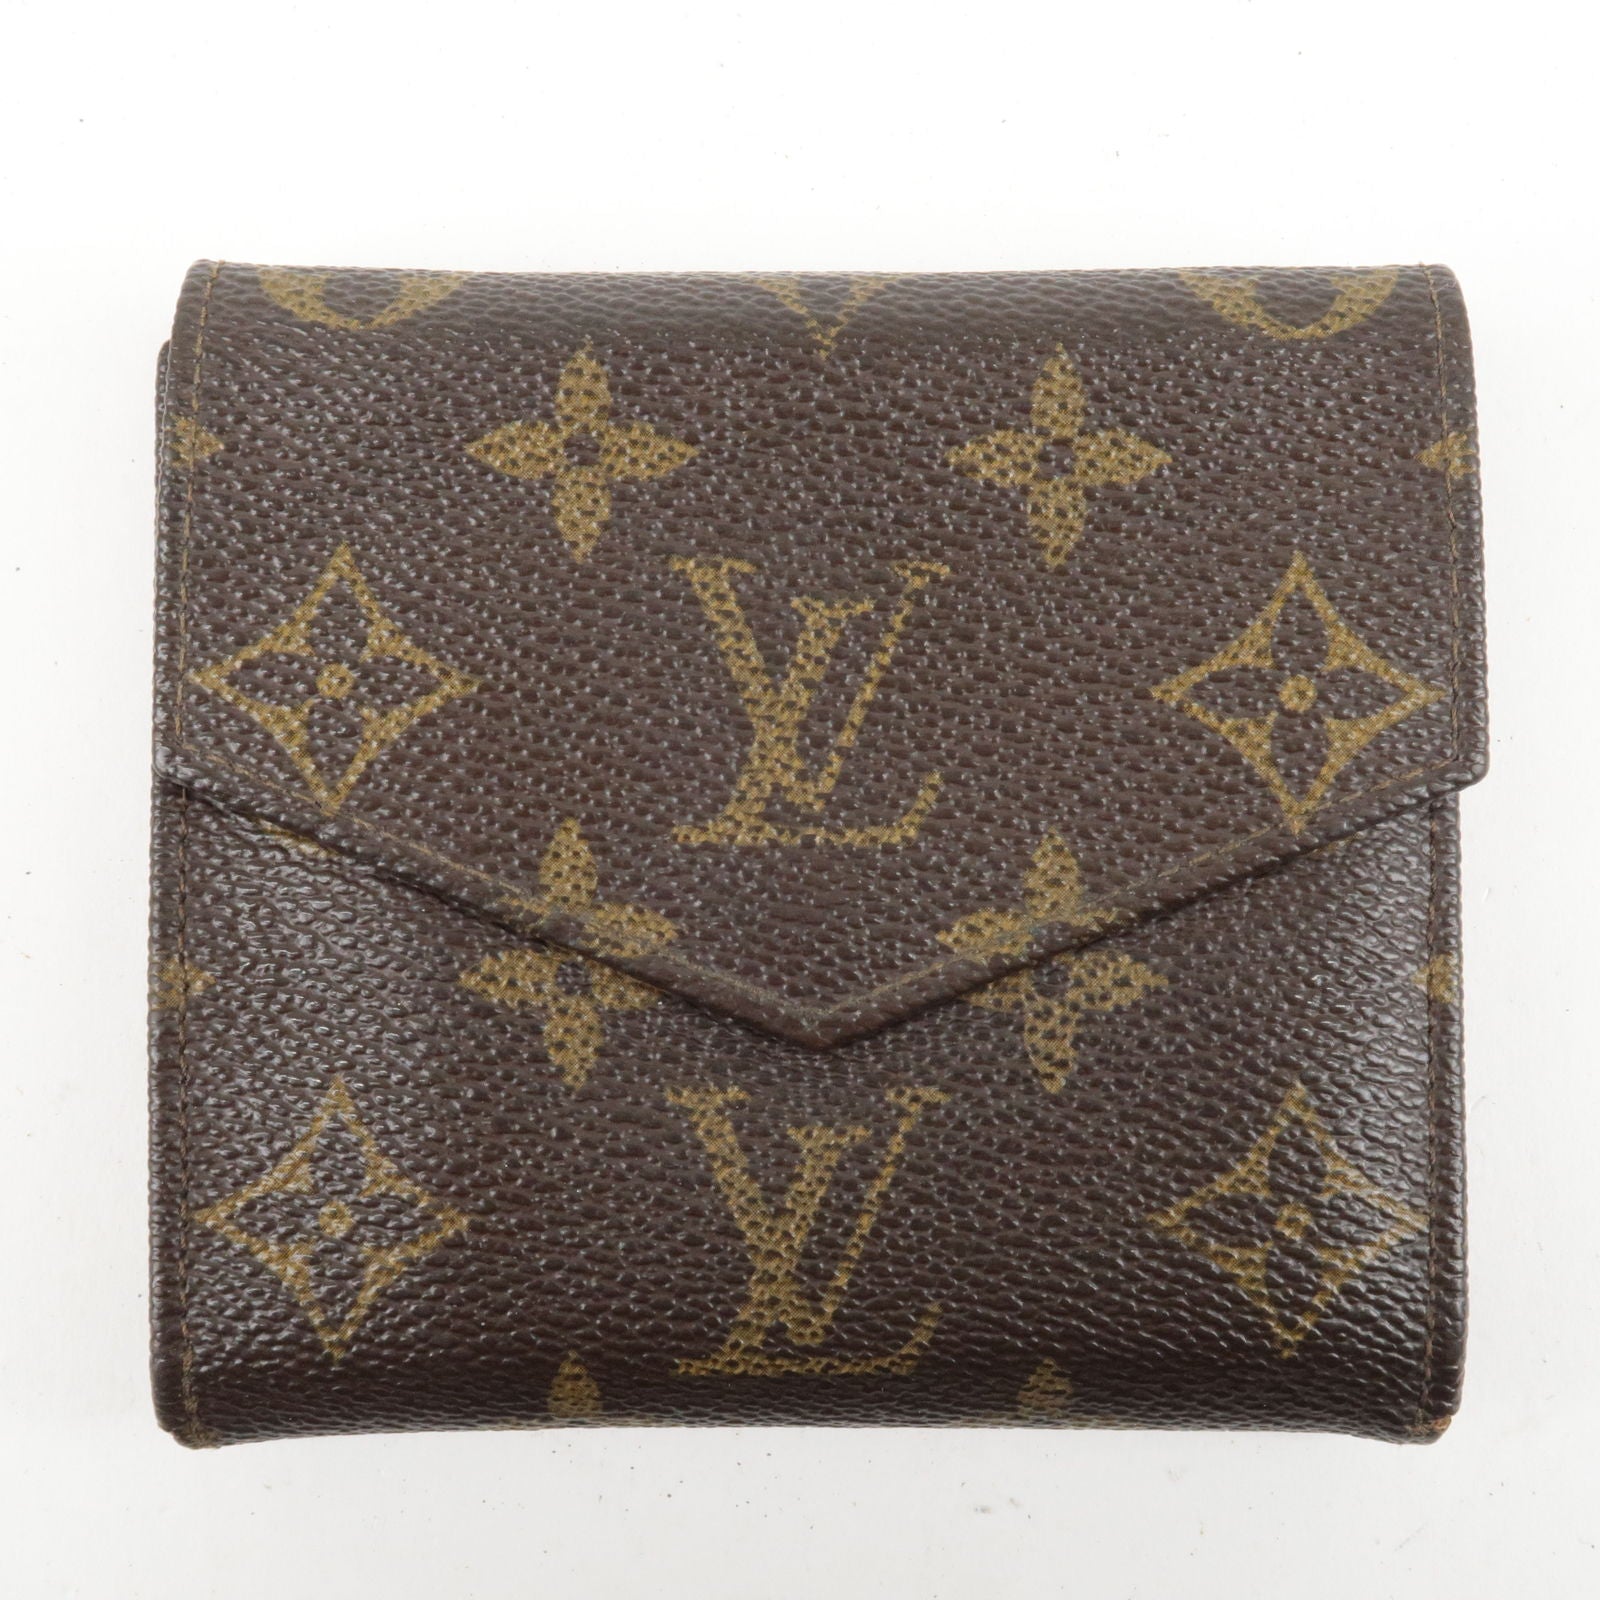 Pre-owned Louis Vuitton Portefeuille Brazza Navy Leather Wallet ()